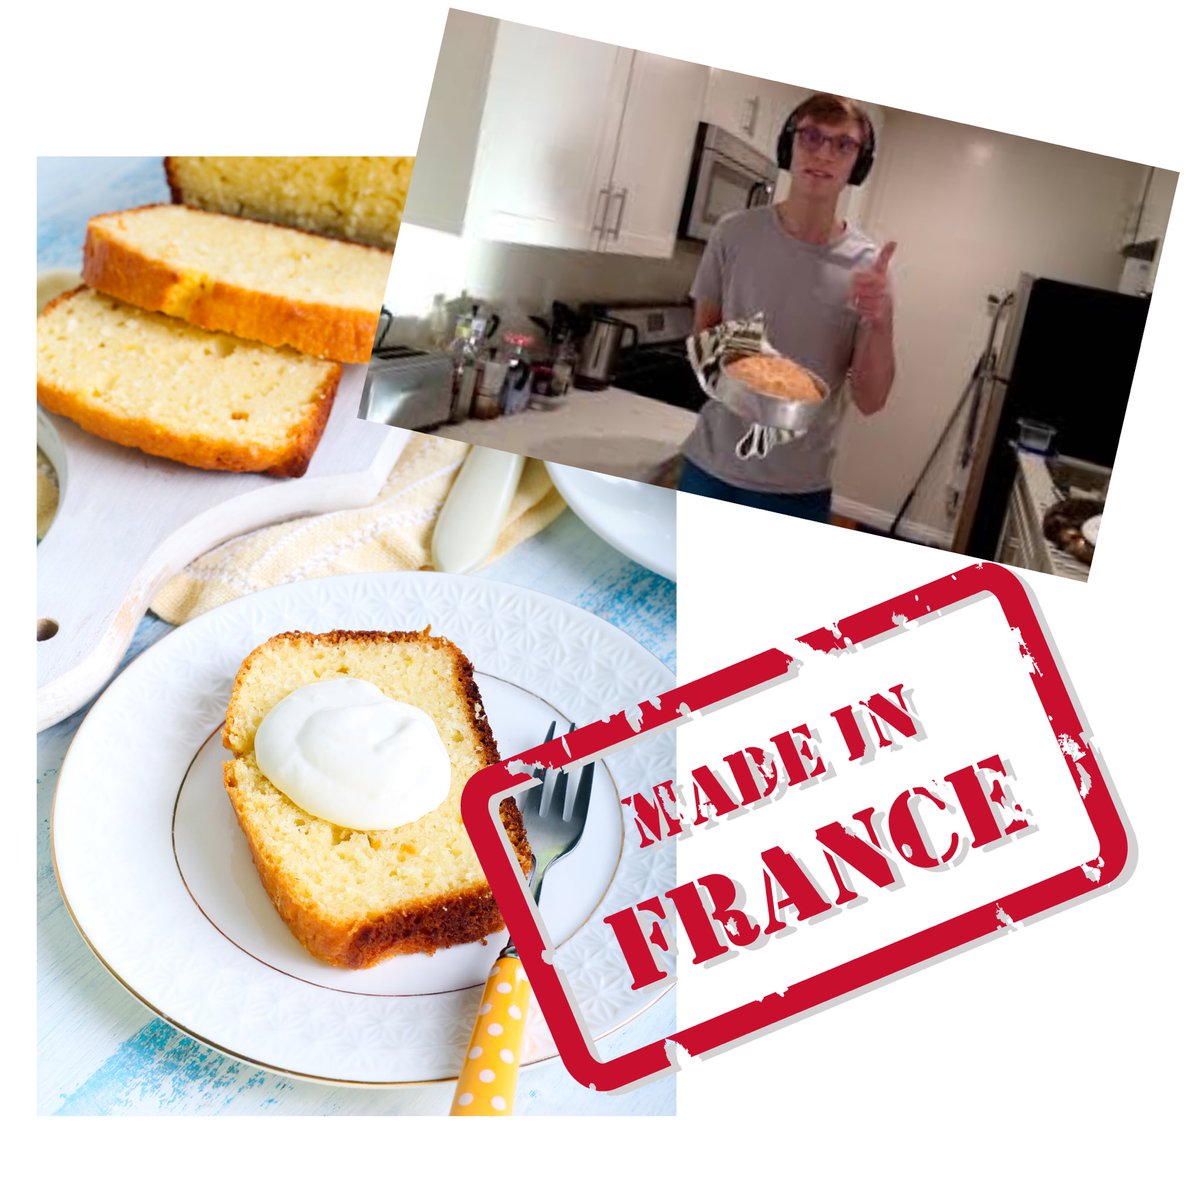 youtu.be/82l_jII_-Ck 4 simple ingredients make this delicious, easy cake perfect for #goûter (afternoon snack) or dessert. Follow along as Mr. Foster demonstrates in this video made for his French Language and Culture summer school class. #WeAreGooden #WeAreChefs